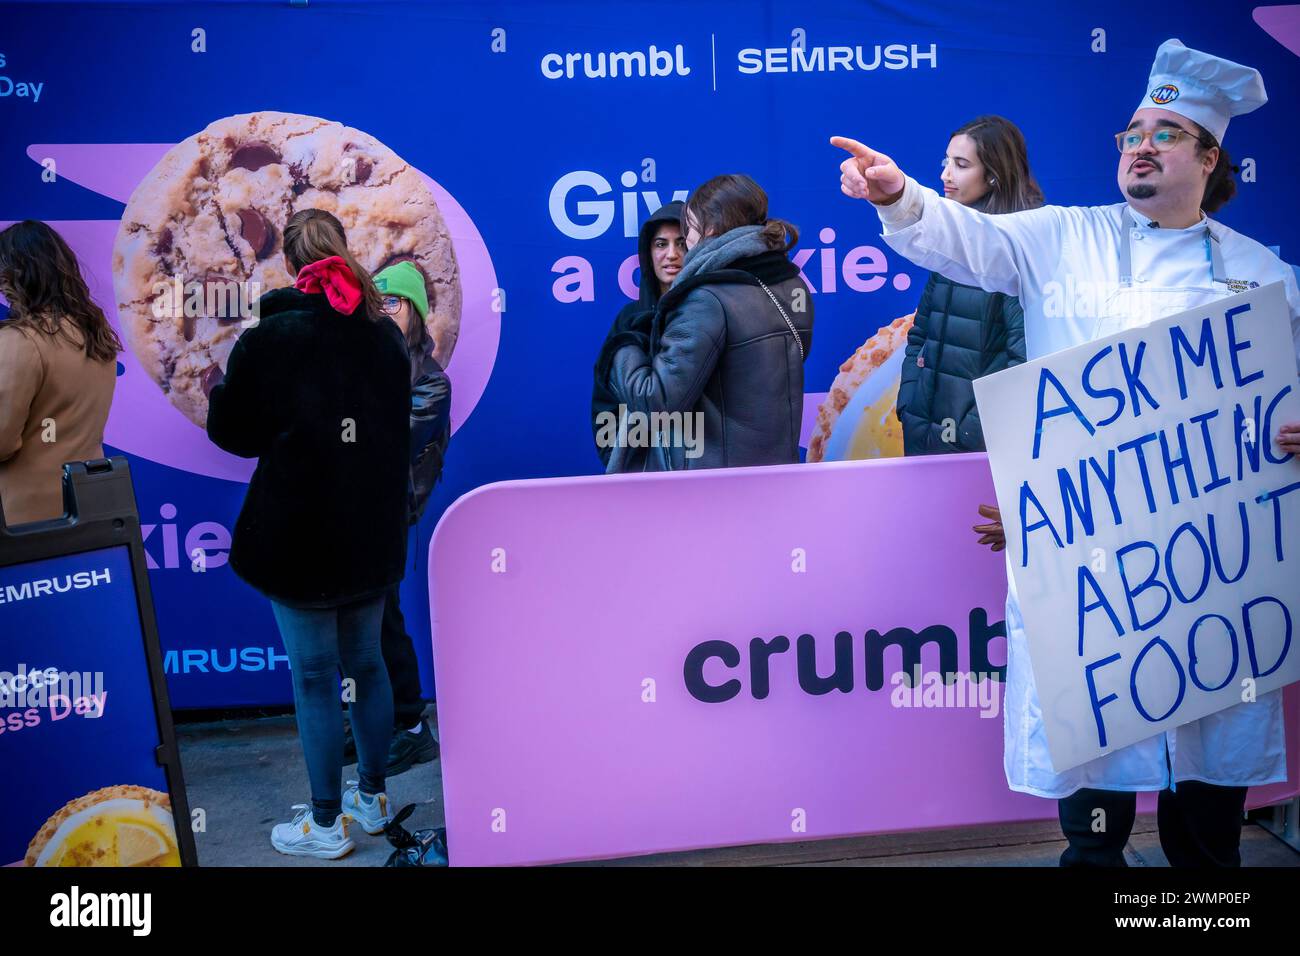 Cookie lovers rush to the Crumbl store in Chelsea in New York on Friday, February 16, 2024 to celebrate Saturday’s Random Acts of Kindness Day. Partnering with Semrush, a SaaS analysis platform, they are giving out thousands of cookies, two for each person. Recipients are urged to keep one cookie for themselves and to give away the other as a random act of kindness. (© Richard B. Levine) Stock Photo